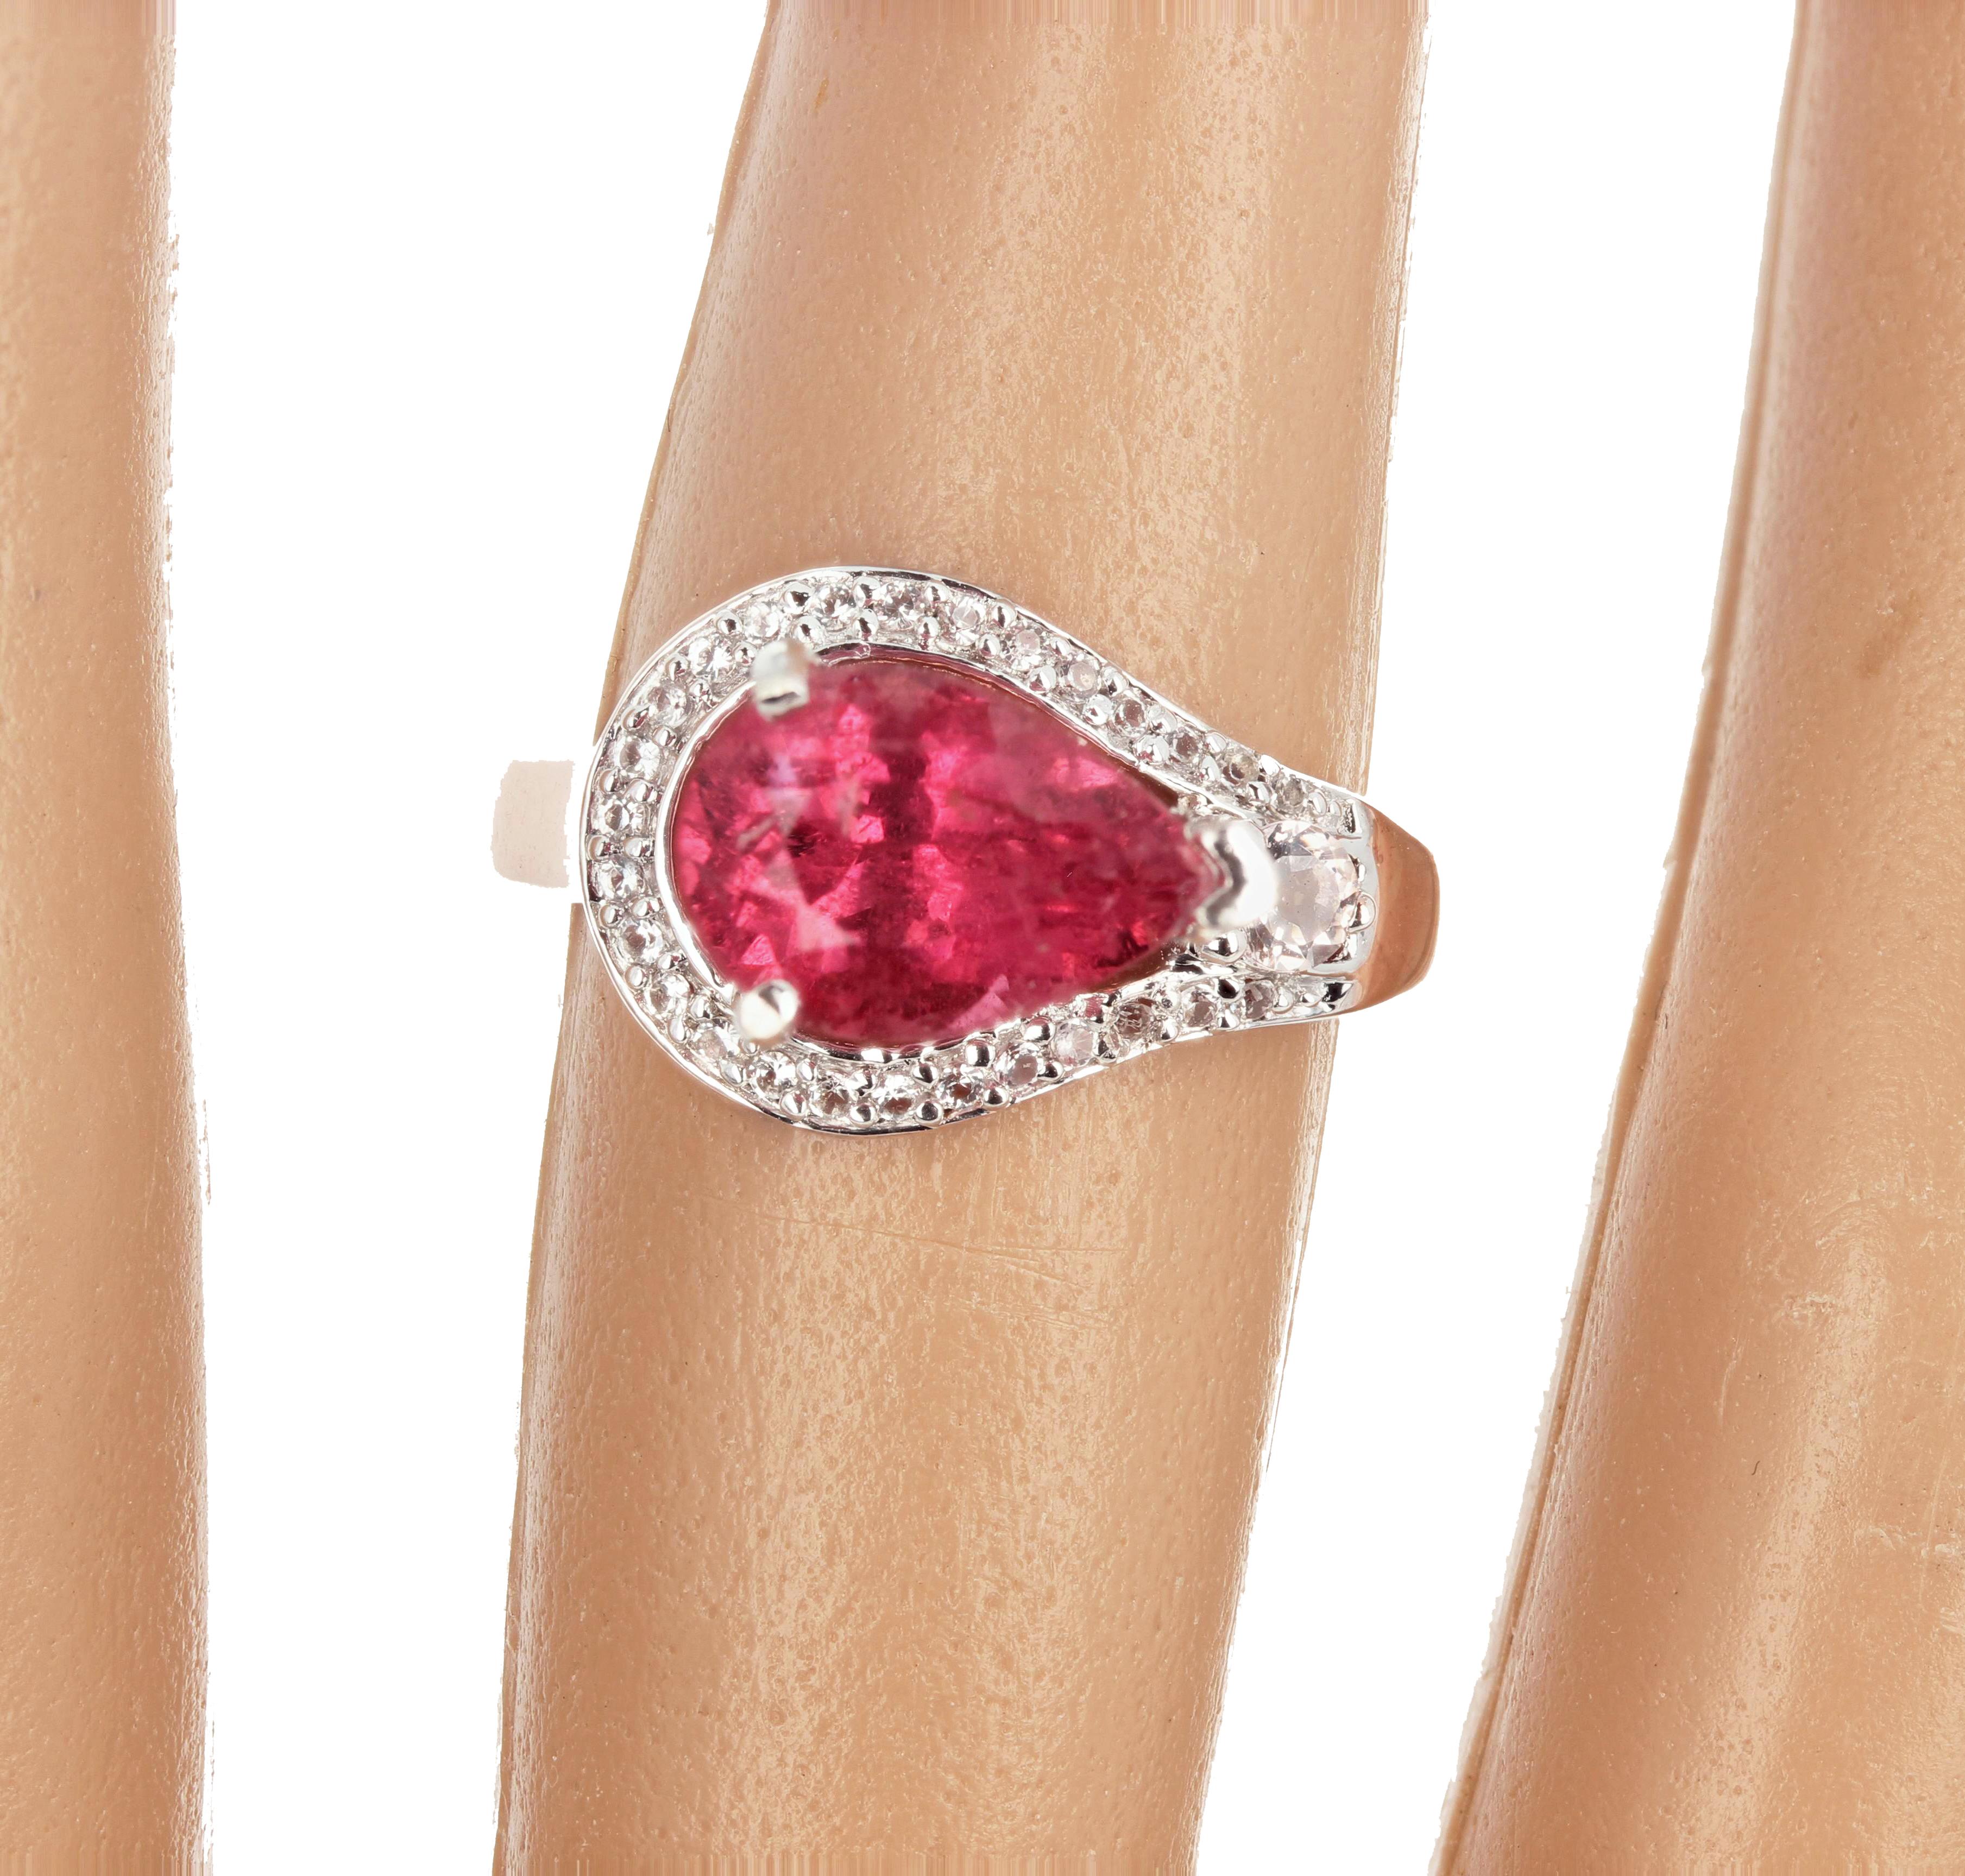 This glittering pear gem cut Pinky-Reddish natural Tourmaline is set in a rose gold plated sterling silver ring size 7 (sizable for free) and is enhanced with tiny little white diamonds.  This is glitters beautifully on your hand. 